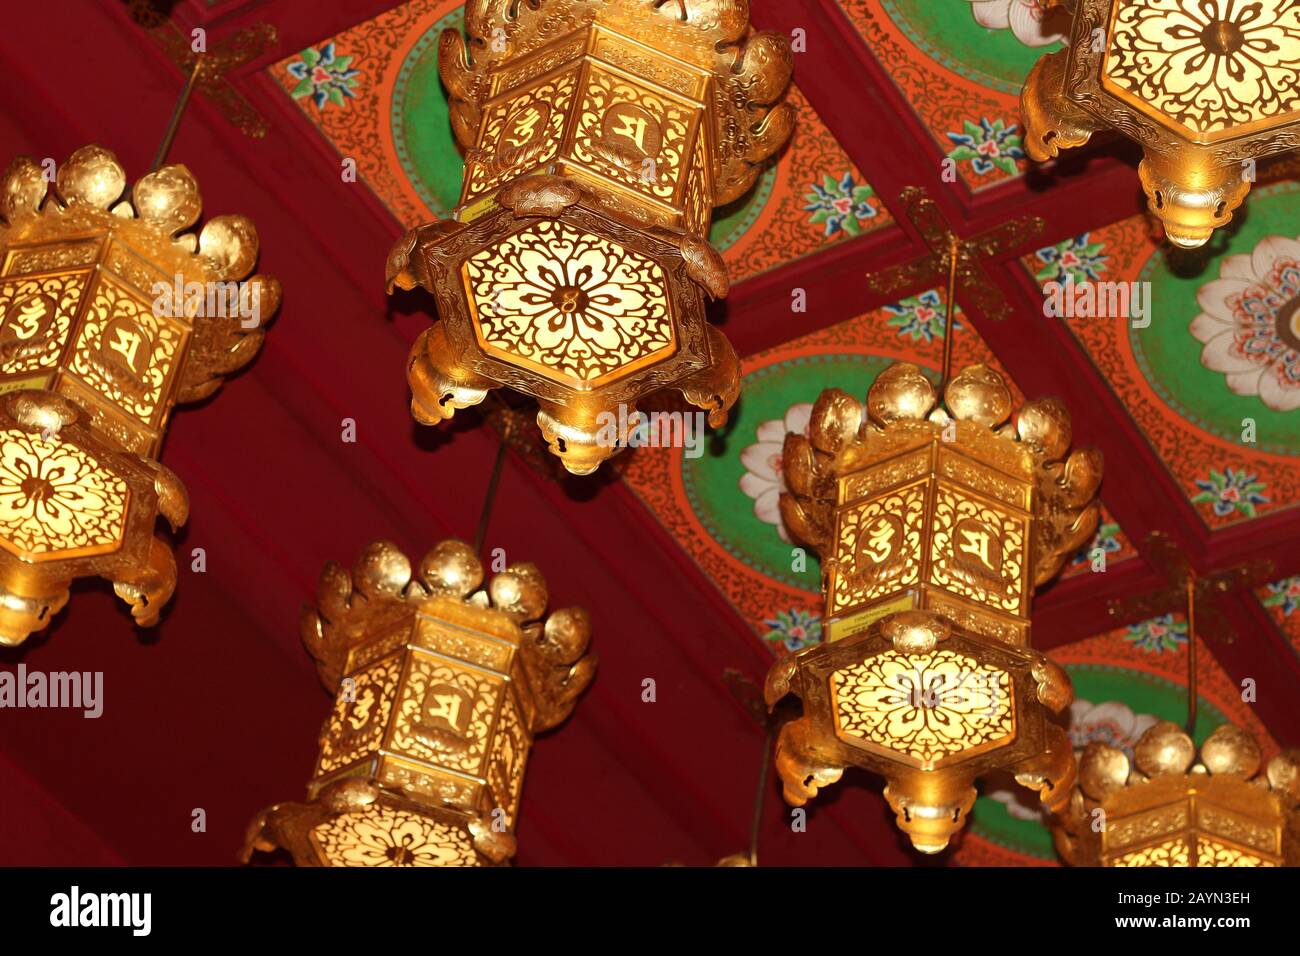 Golden lanterns lining the ceiling of the Buddha Tooth Relic Temple in Singapore Stock Photo